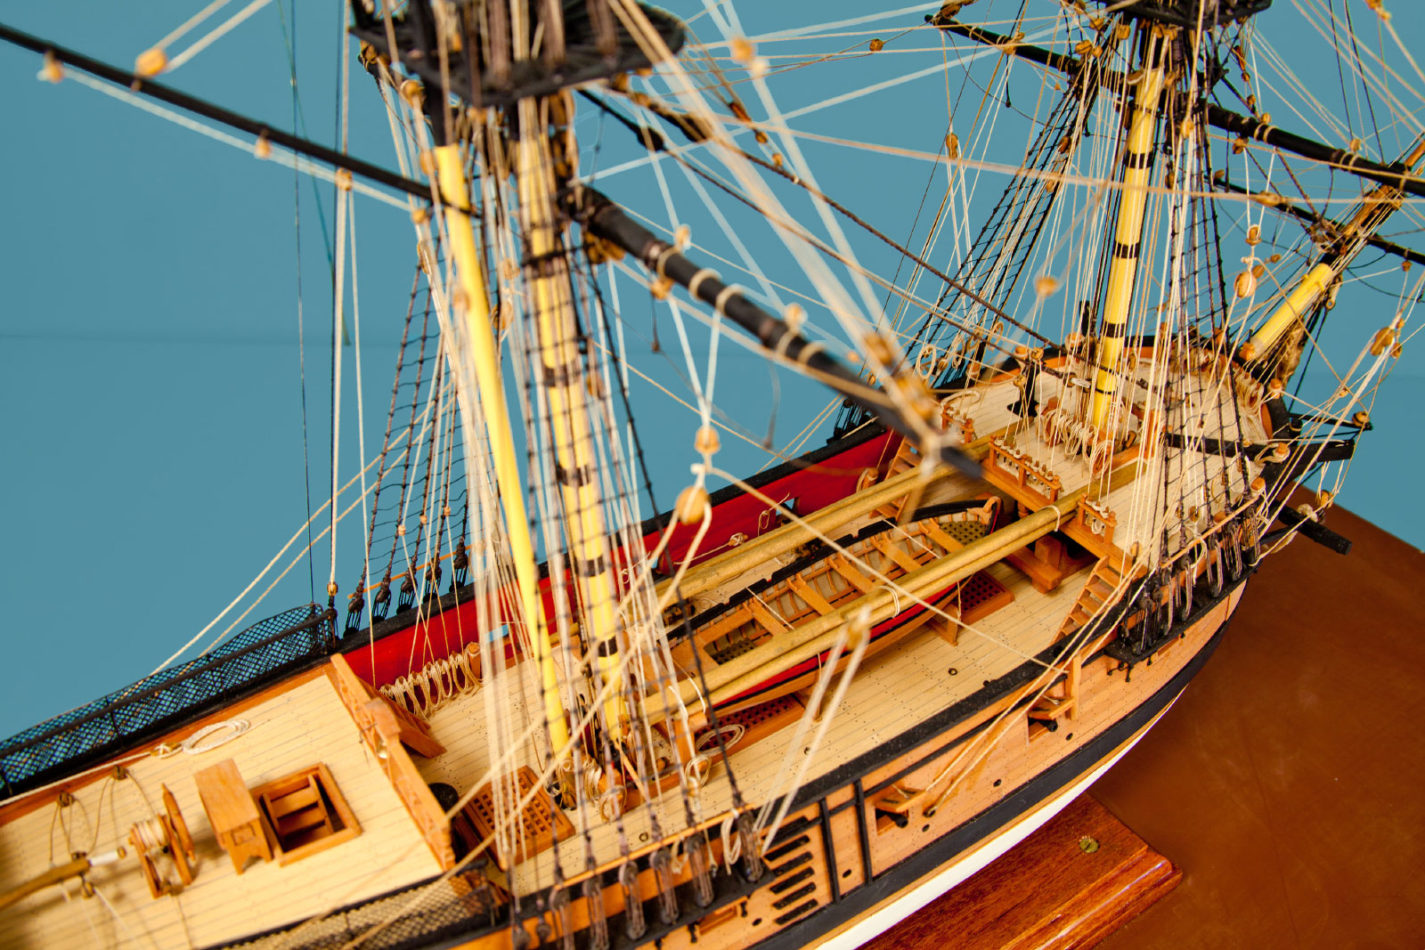 Detail of the San Carlos model ship at the Ships of the World exhibit at San Mateo County History Museum